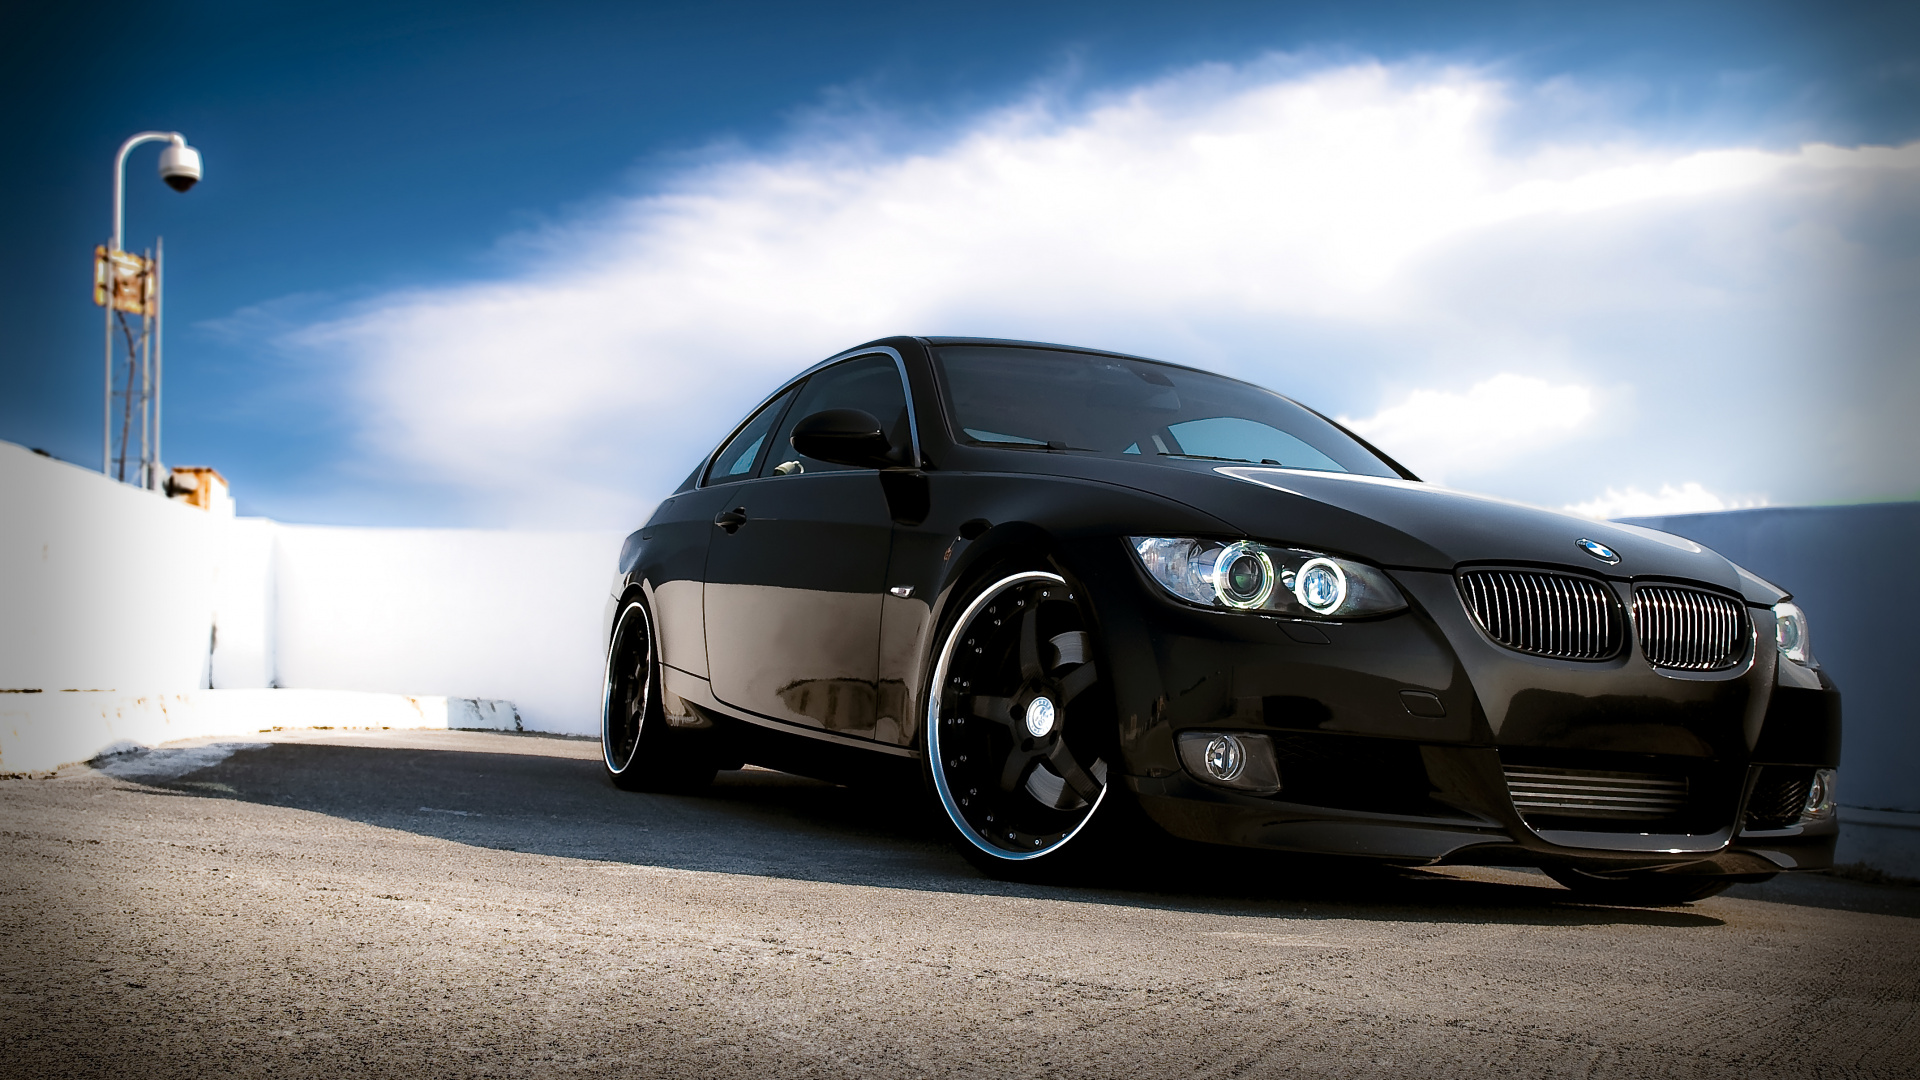 Black Bmw m 3 Coupe. Wallpaper in 1920x1080 Resolution